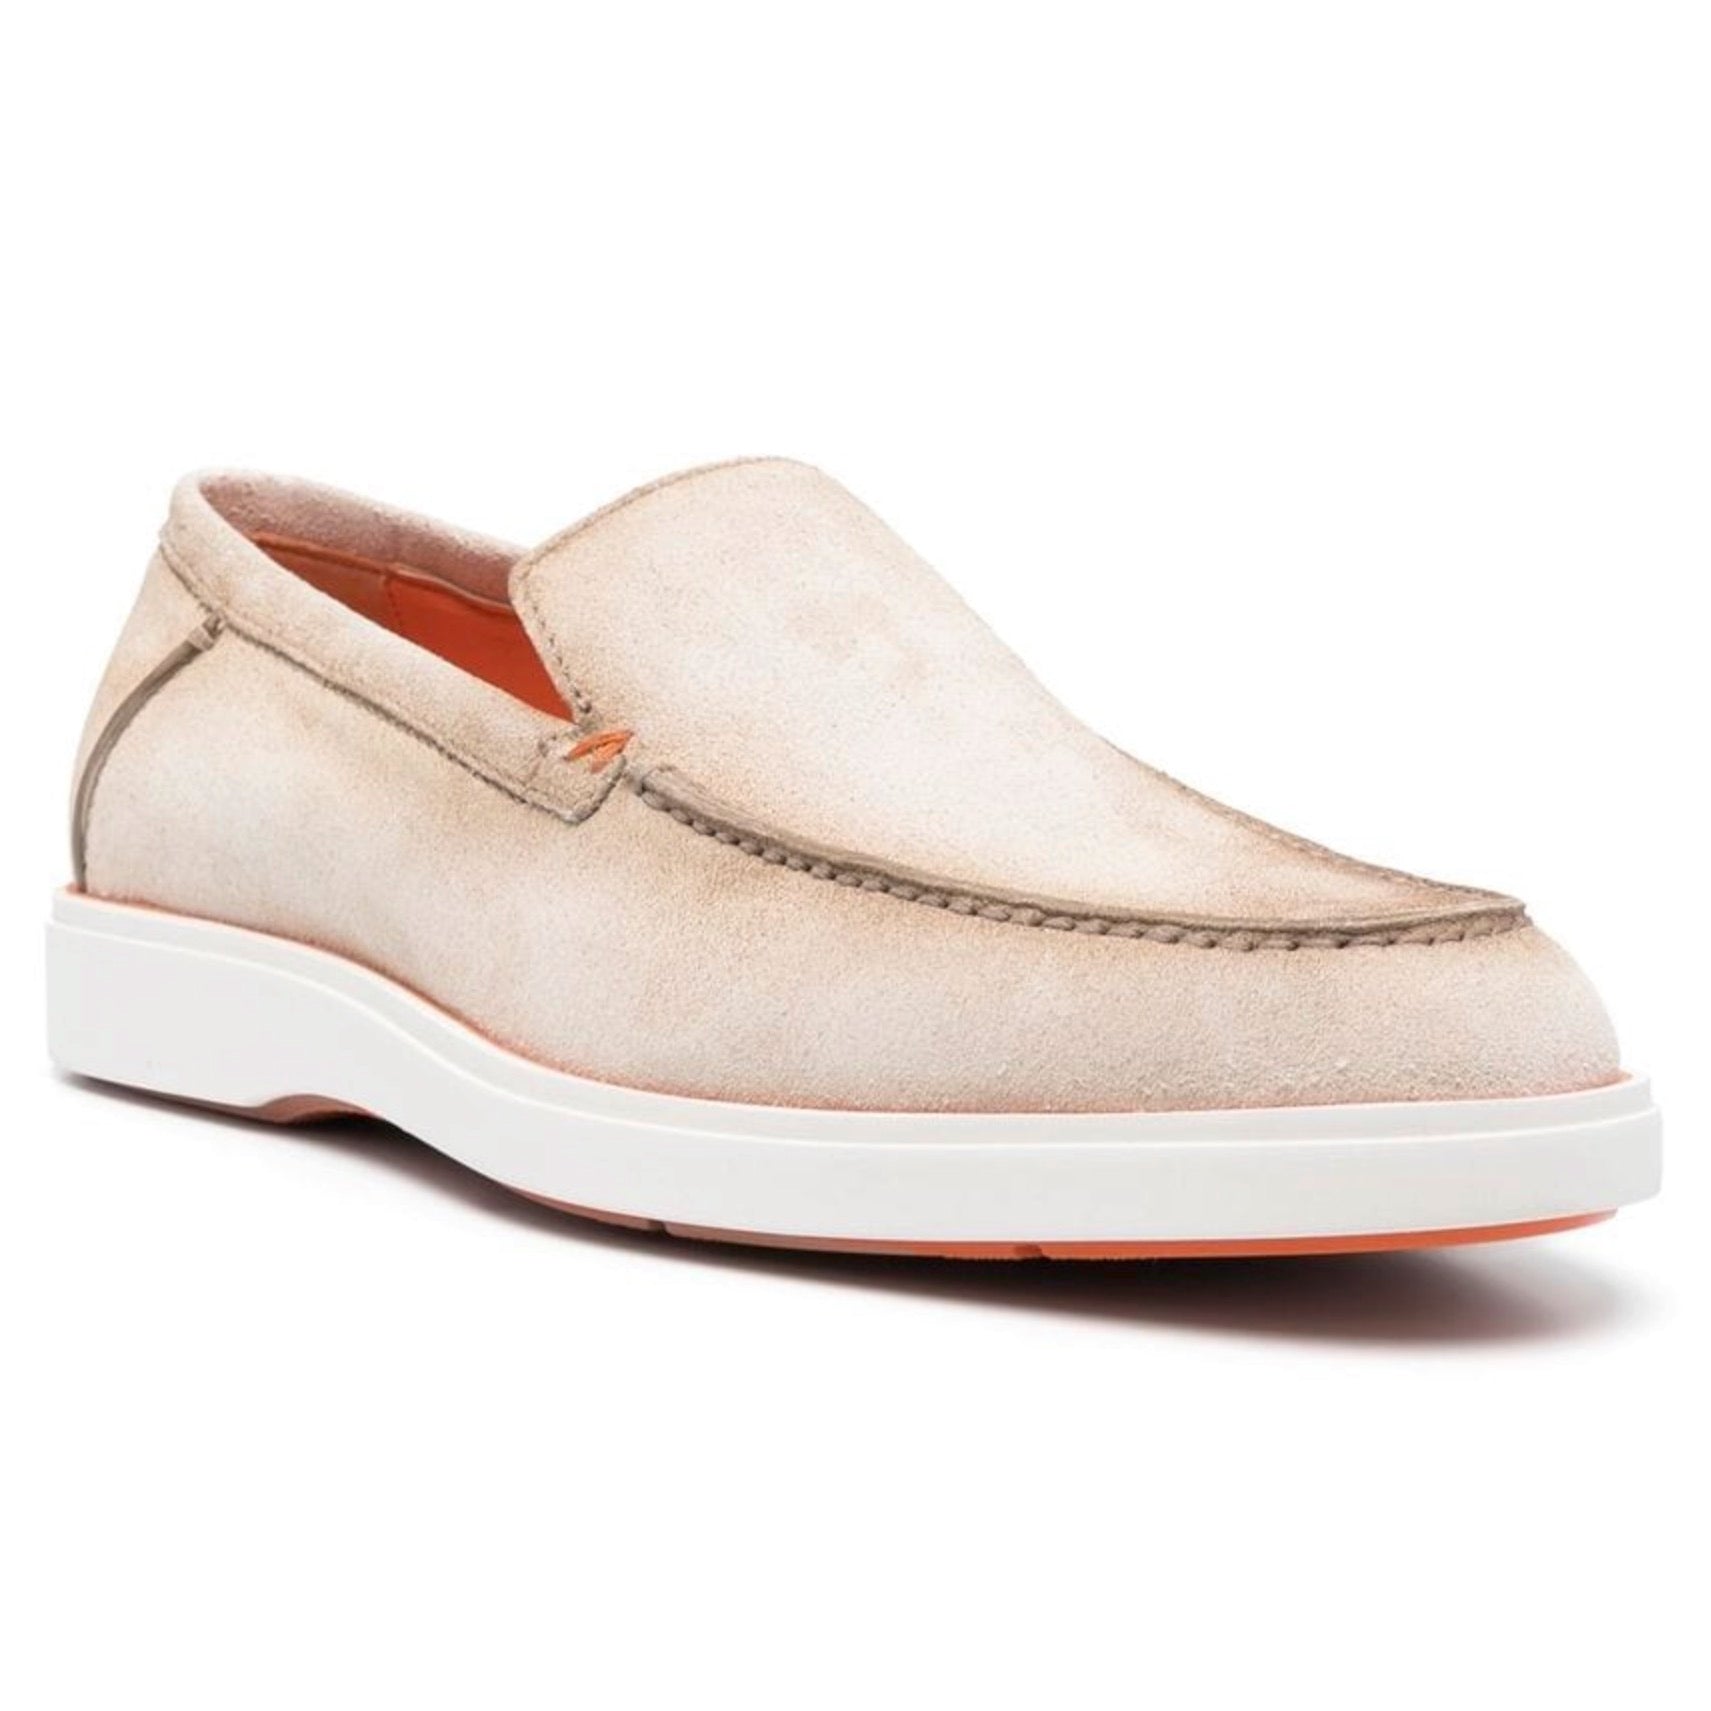 A quintessential Santoni silhouette, these loafers are crafted from smooth suede with a tapered almond-toe silhouette. The understated pair is marked with signature orange detailing for a subtle yet recognisable look.